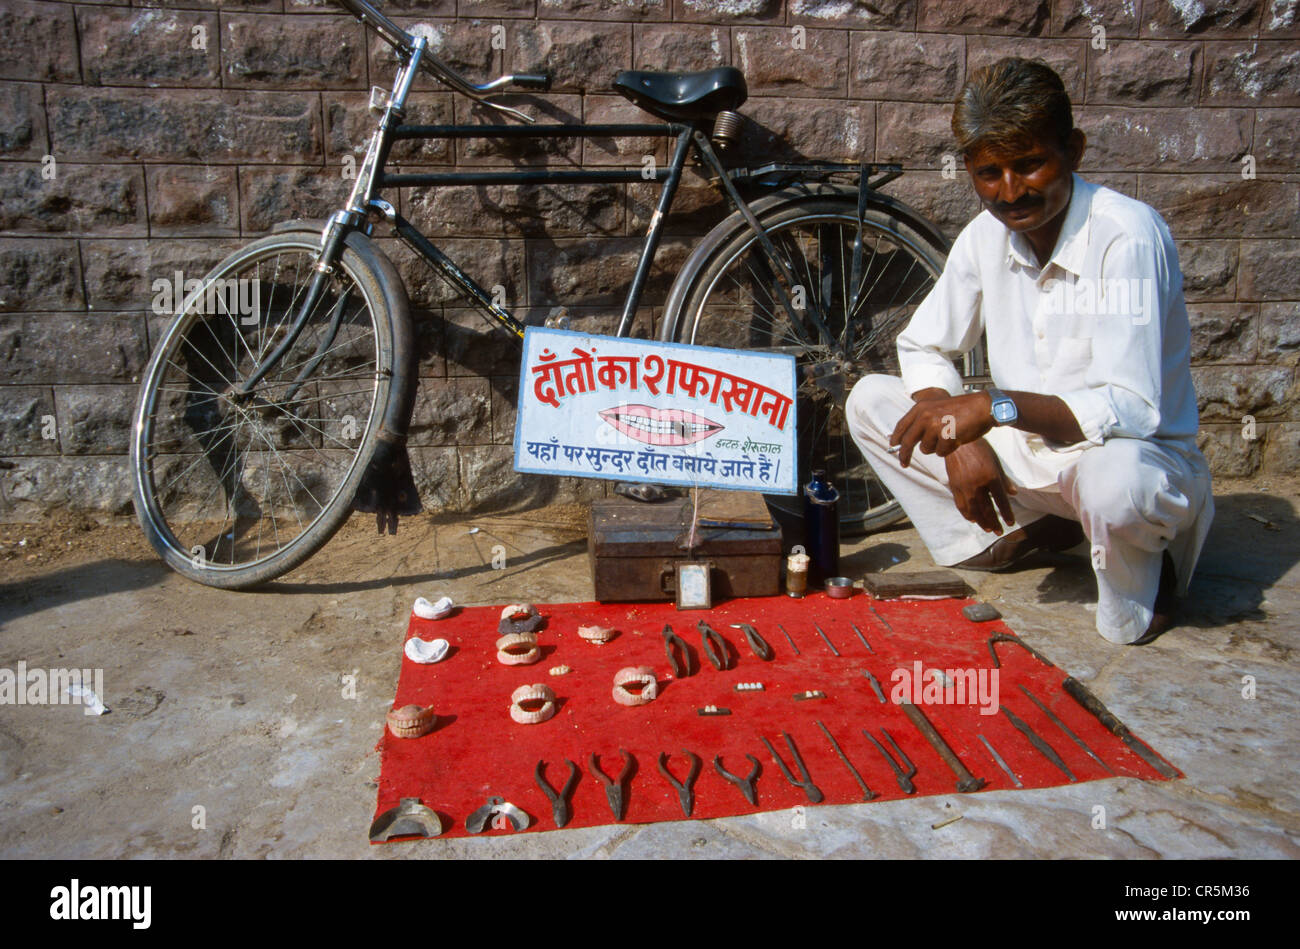 Dentist offering his skills on the street, Udaipur, Rajasthan, India, Asia Stock Photo